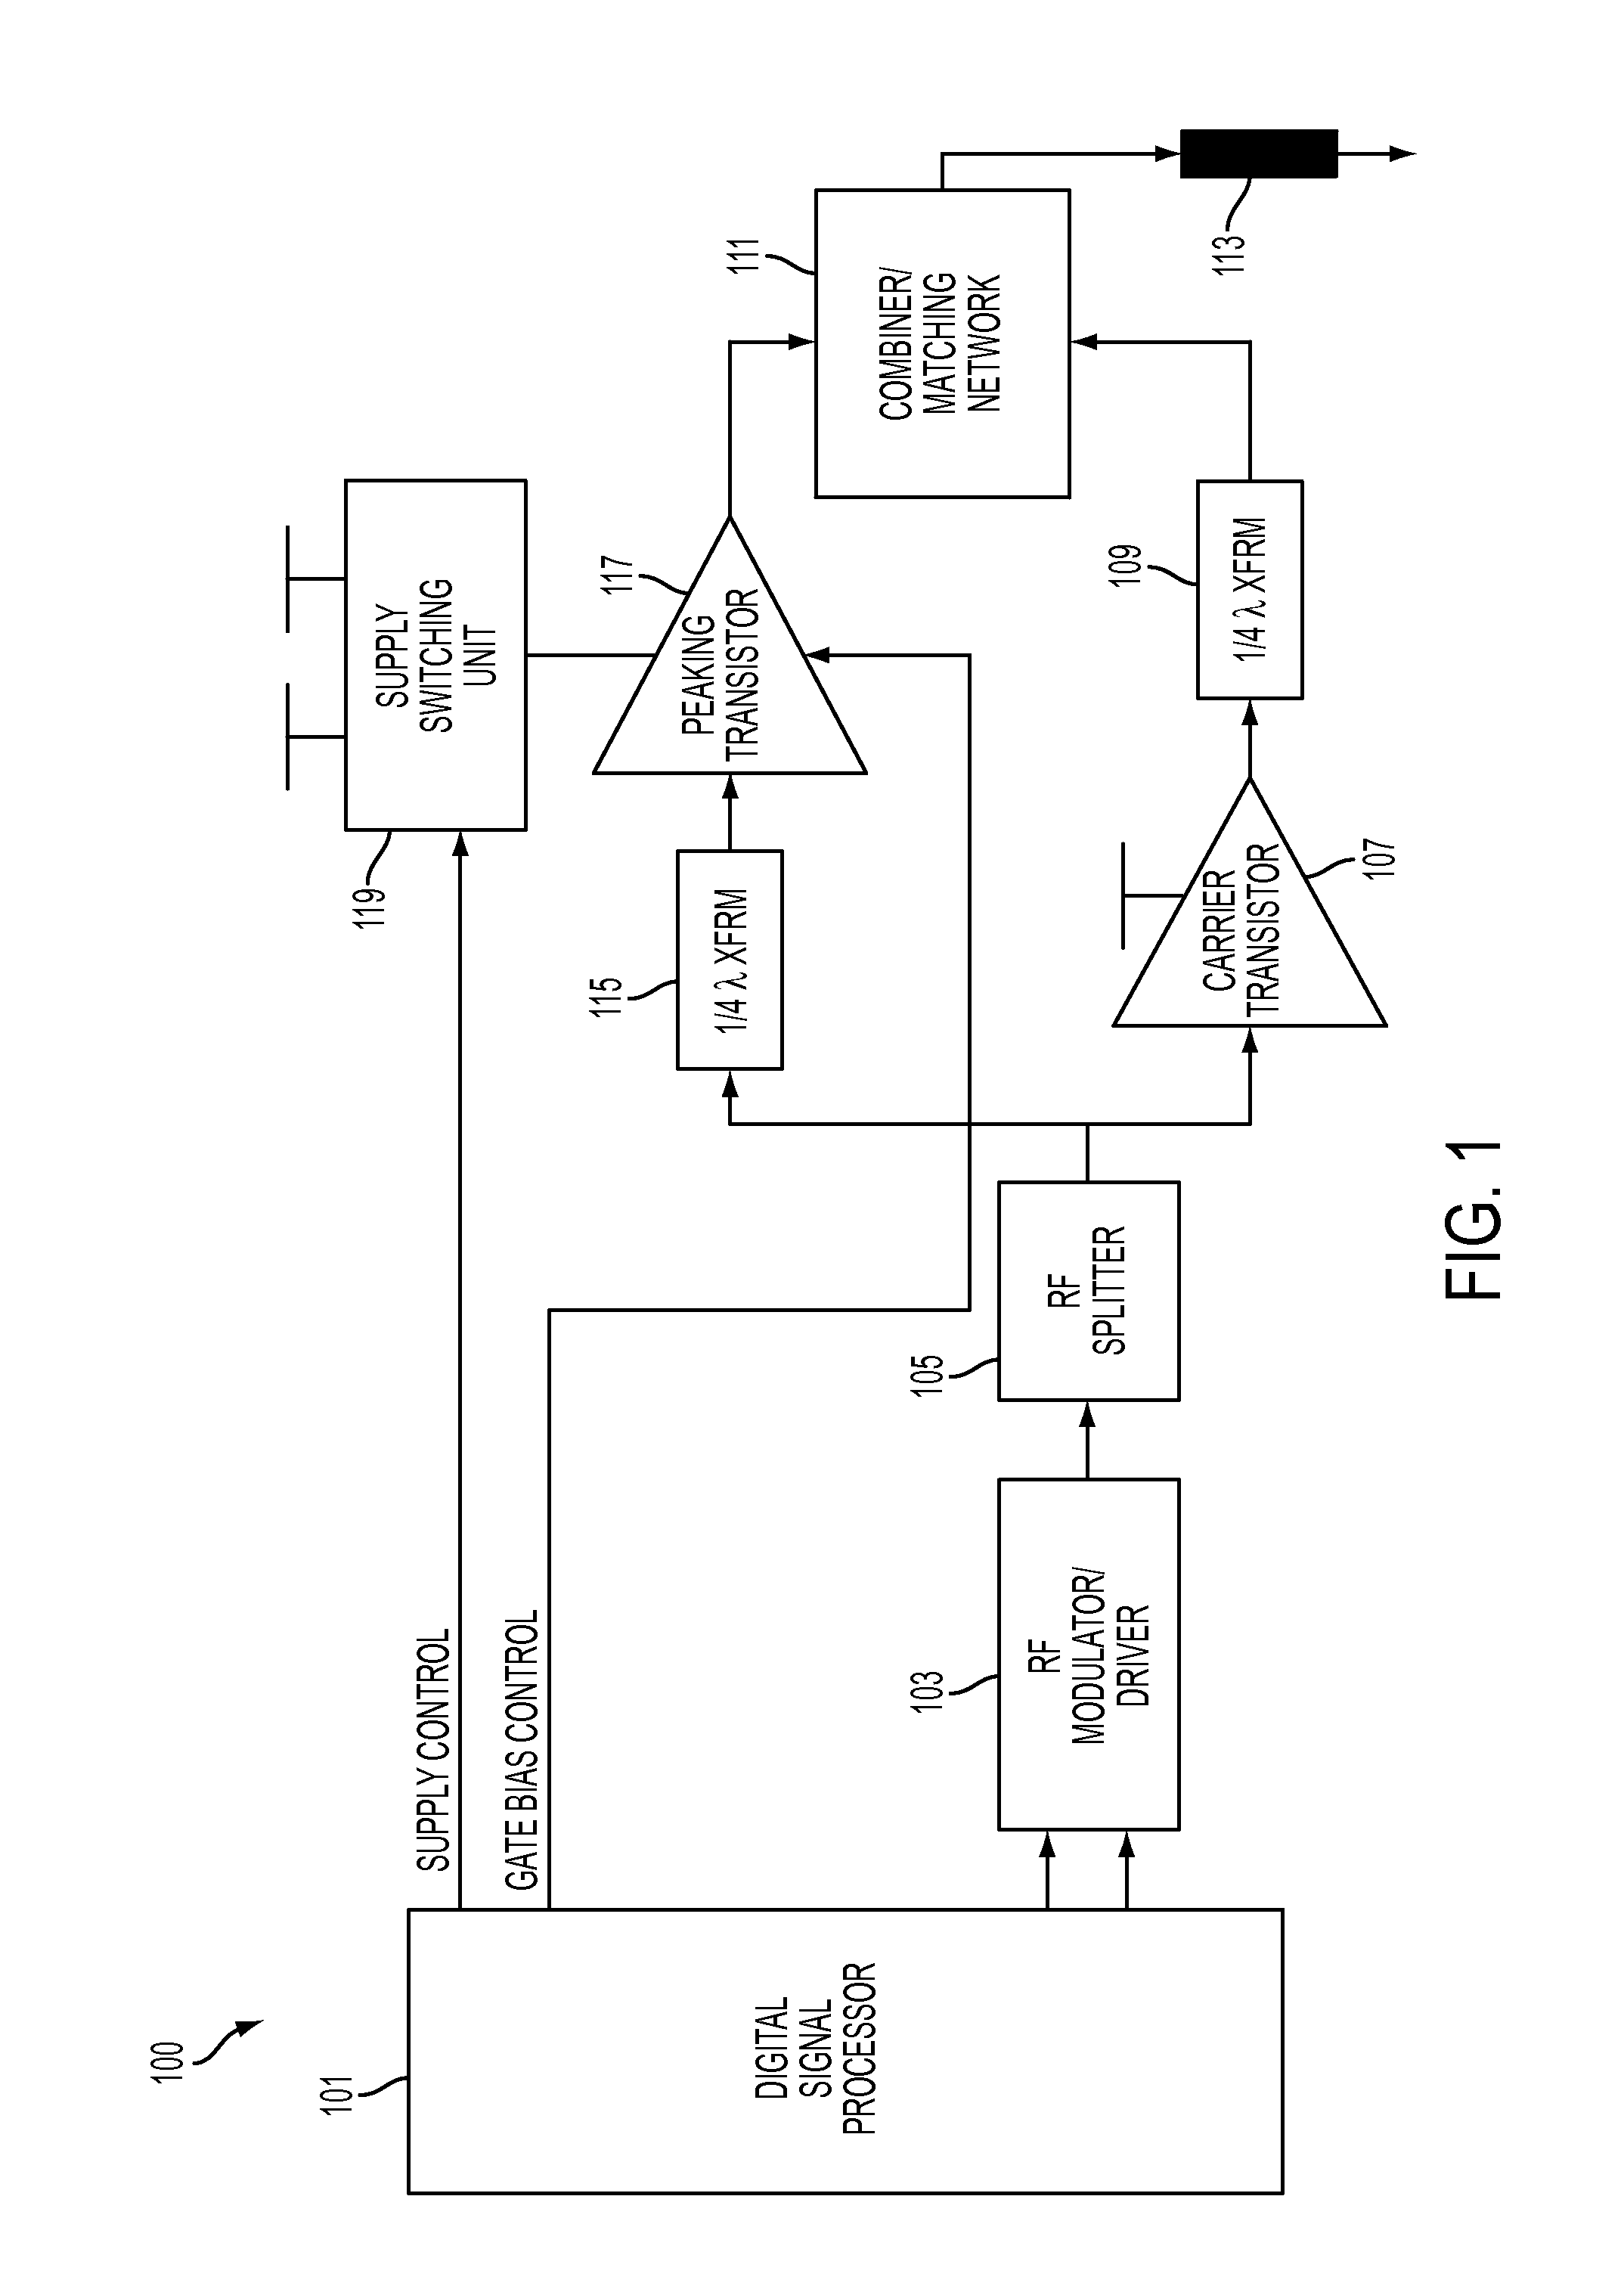 Efficiency improvement of doherty power amplifier using supply switching and digitally controlled gate bias modulation of peaking amplifier